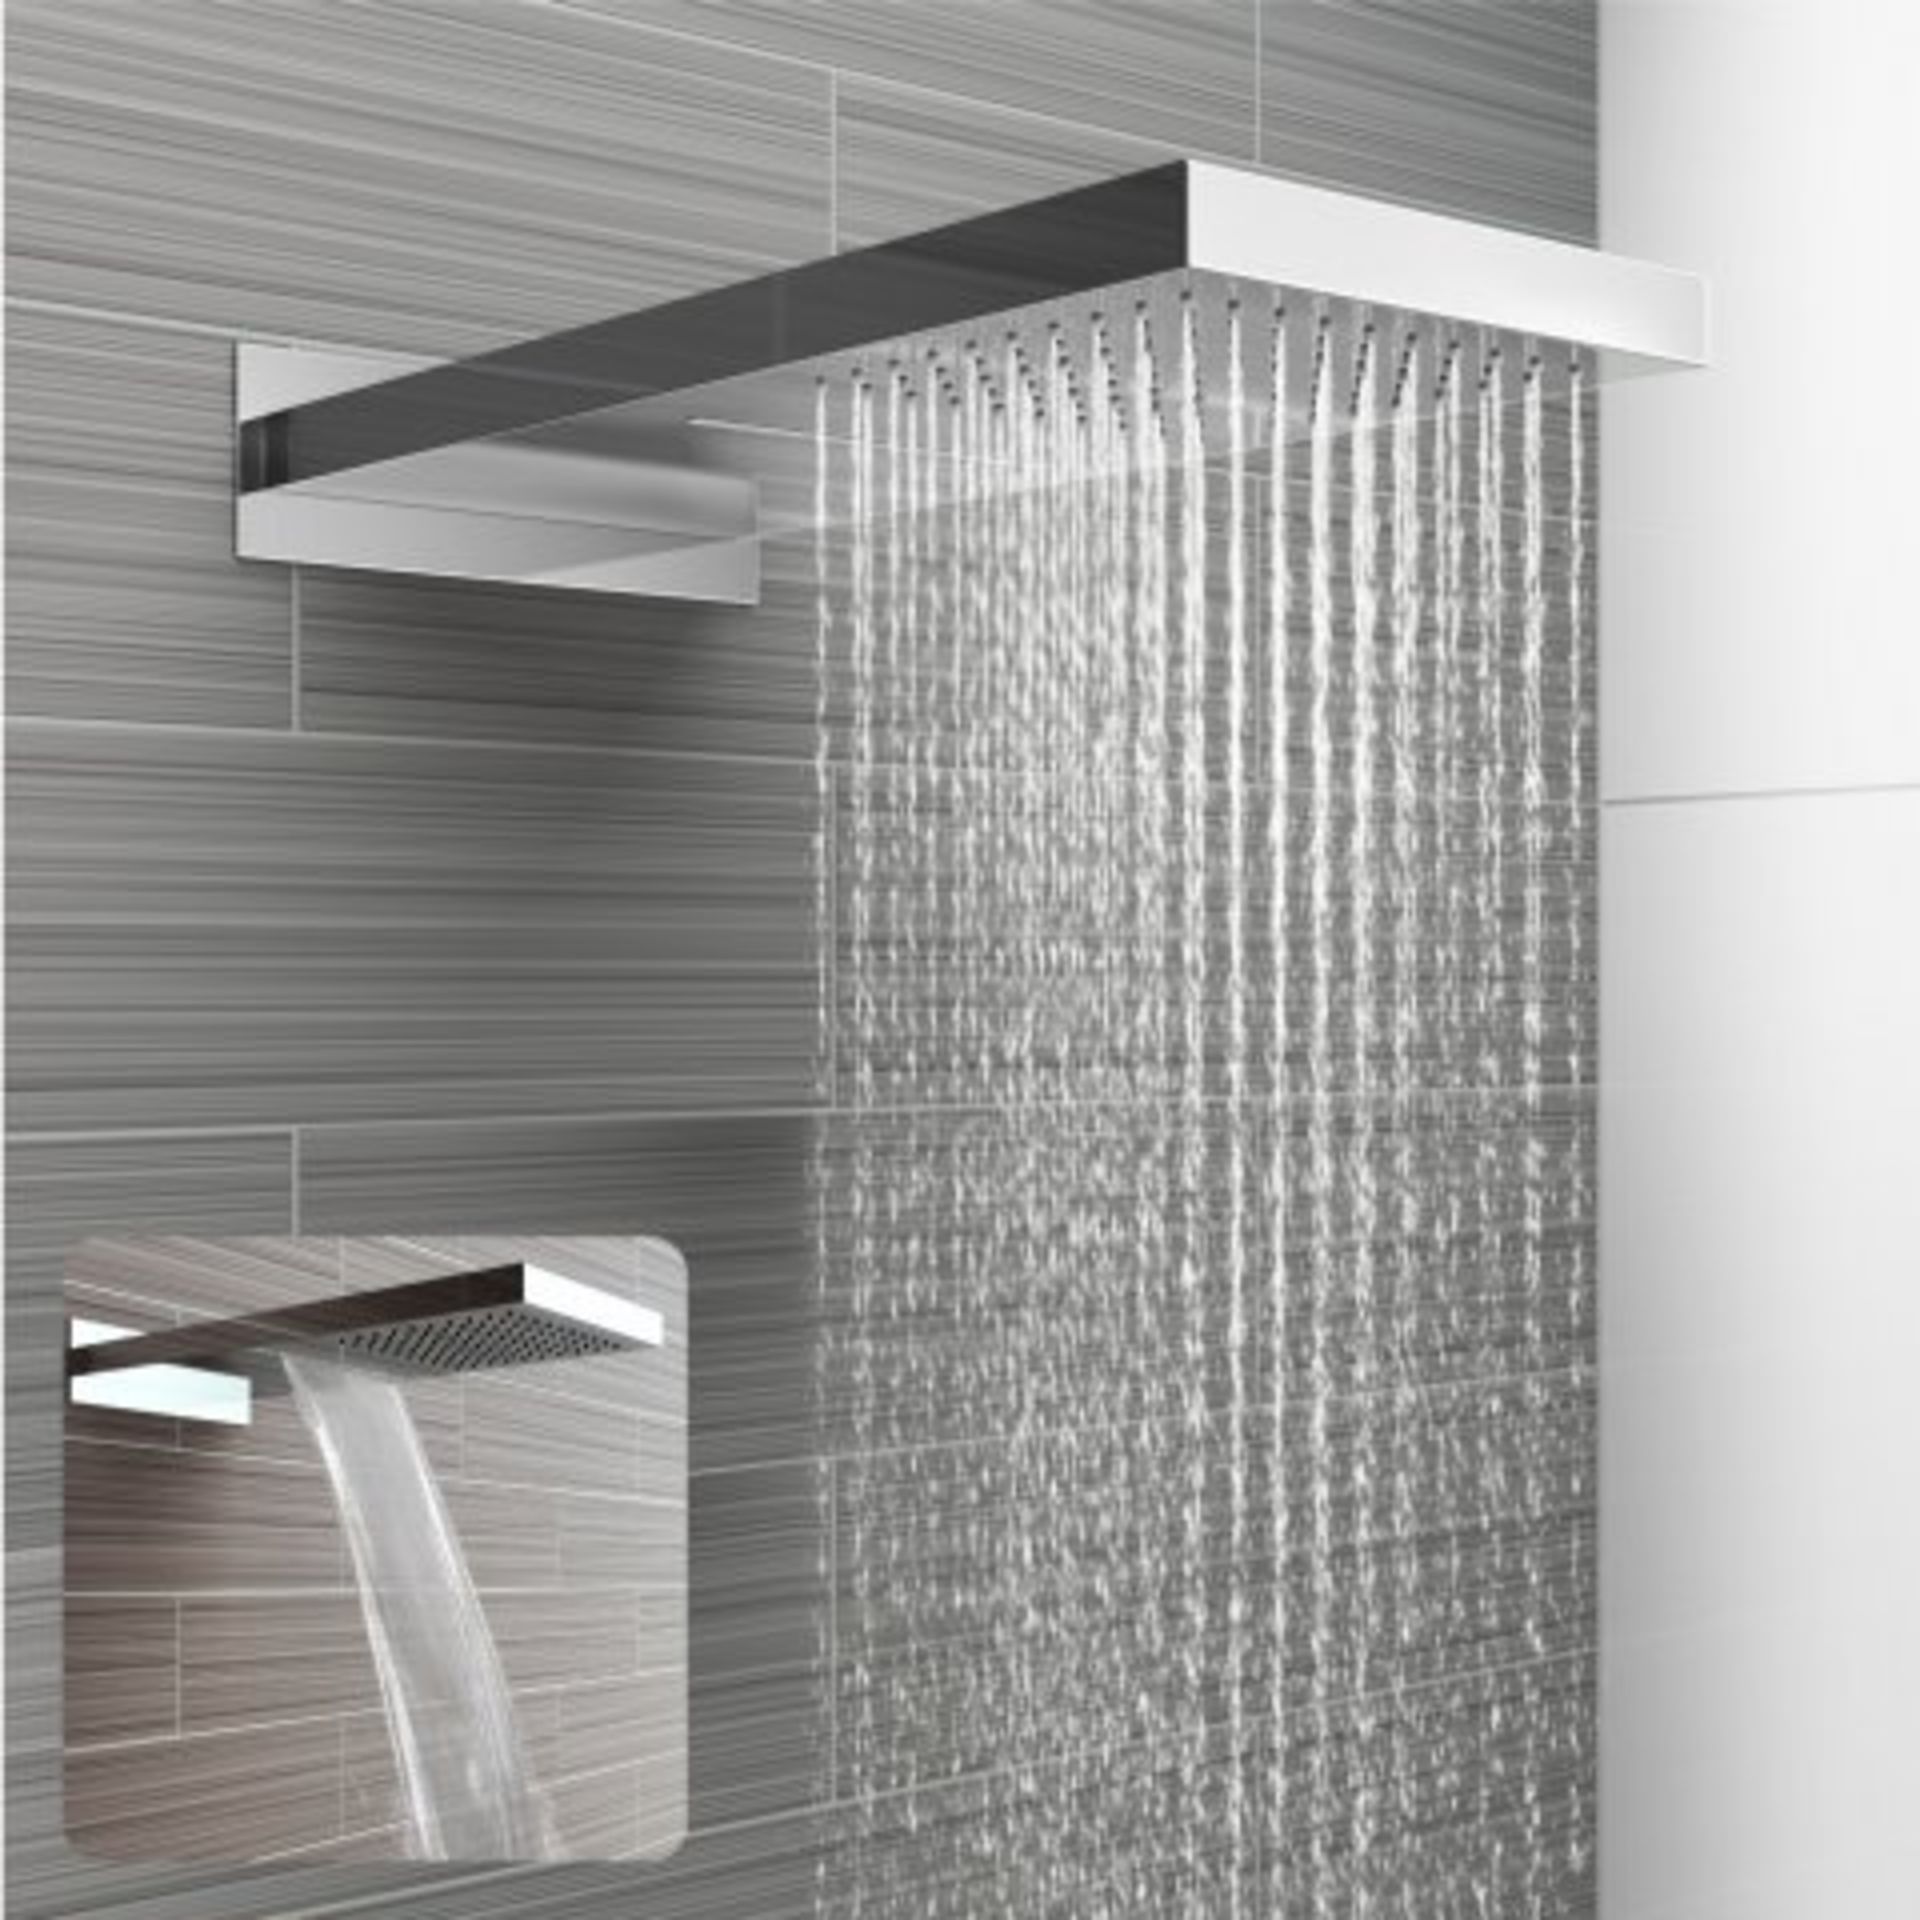 (J213) Stainless Steel 230x550mm Waterfall Shower Head. RRP £459.99. "What An Experience": Enjoy